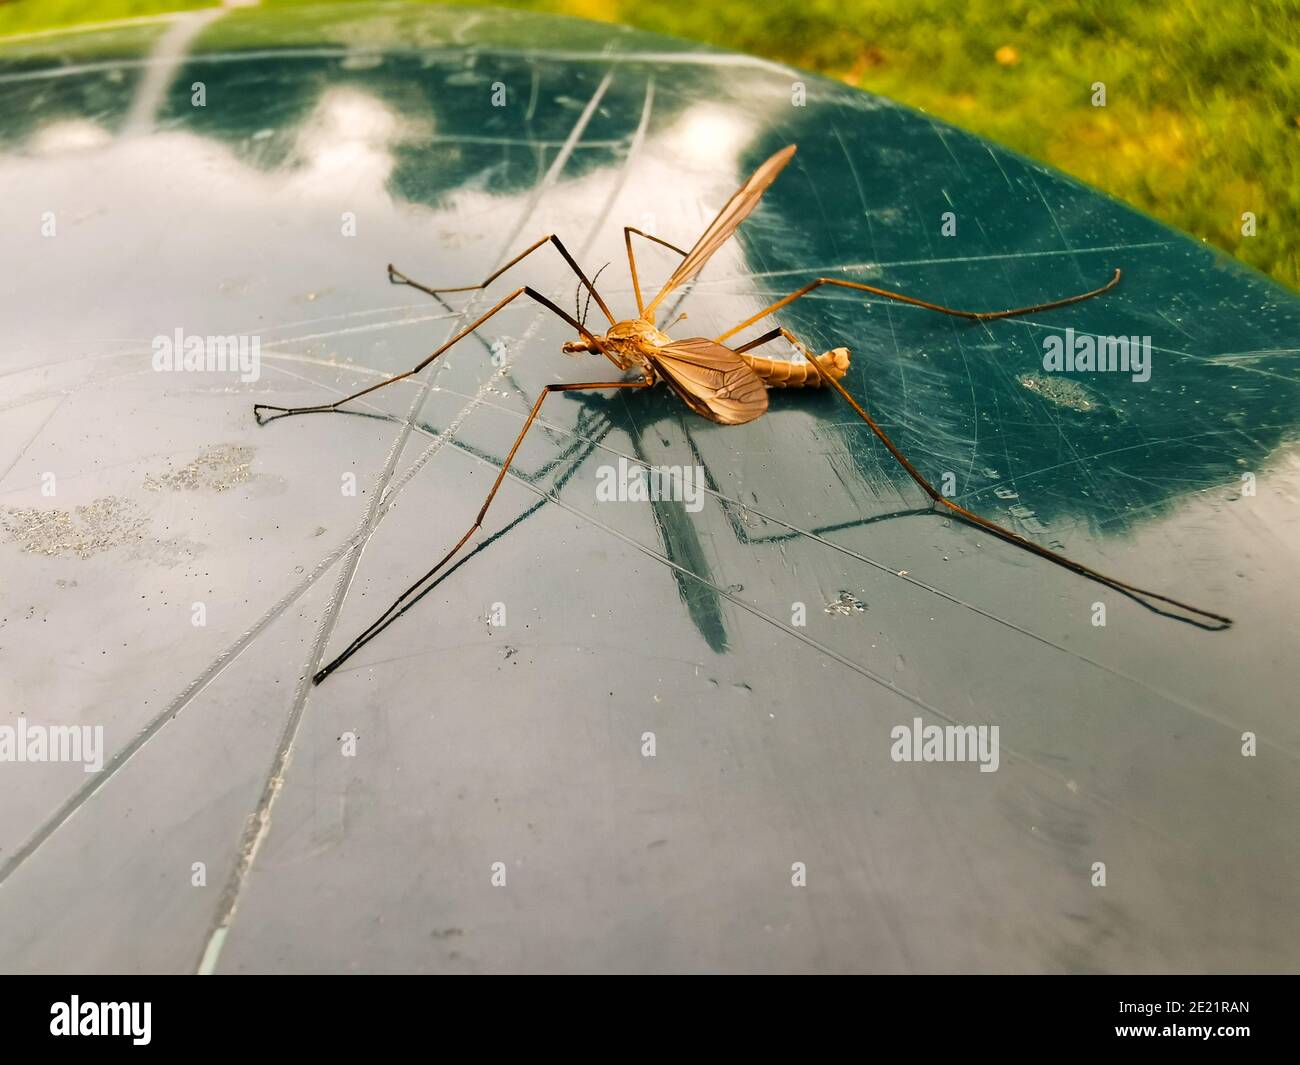 Huge mosquito pictured on a green bin. Stock Photo